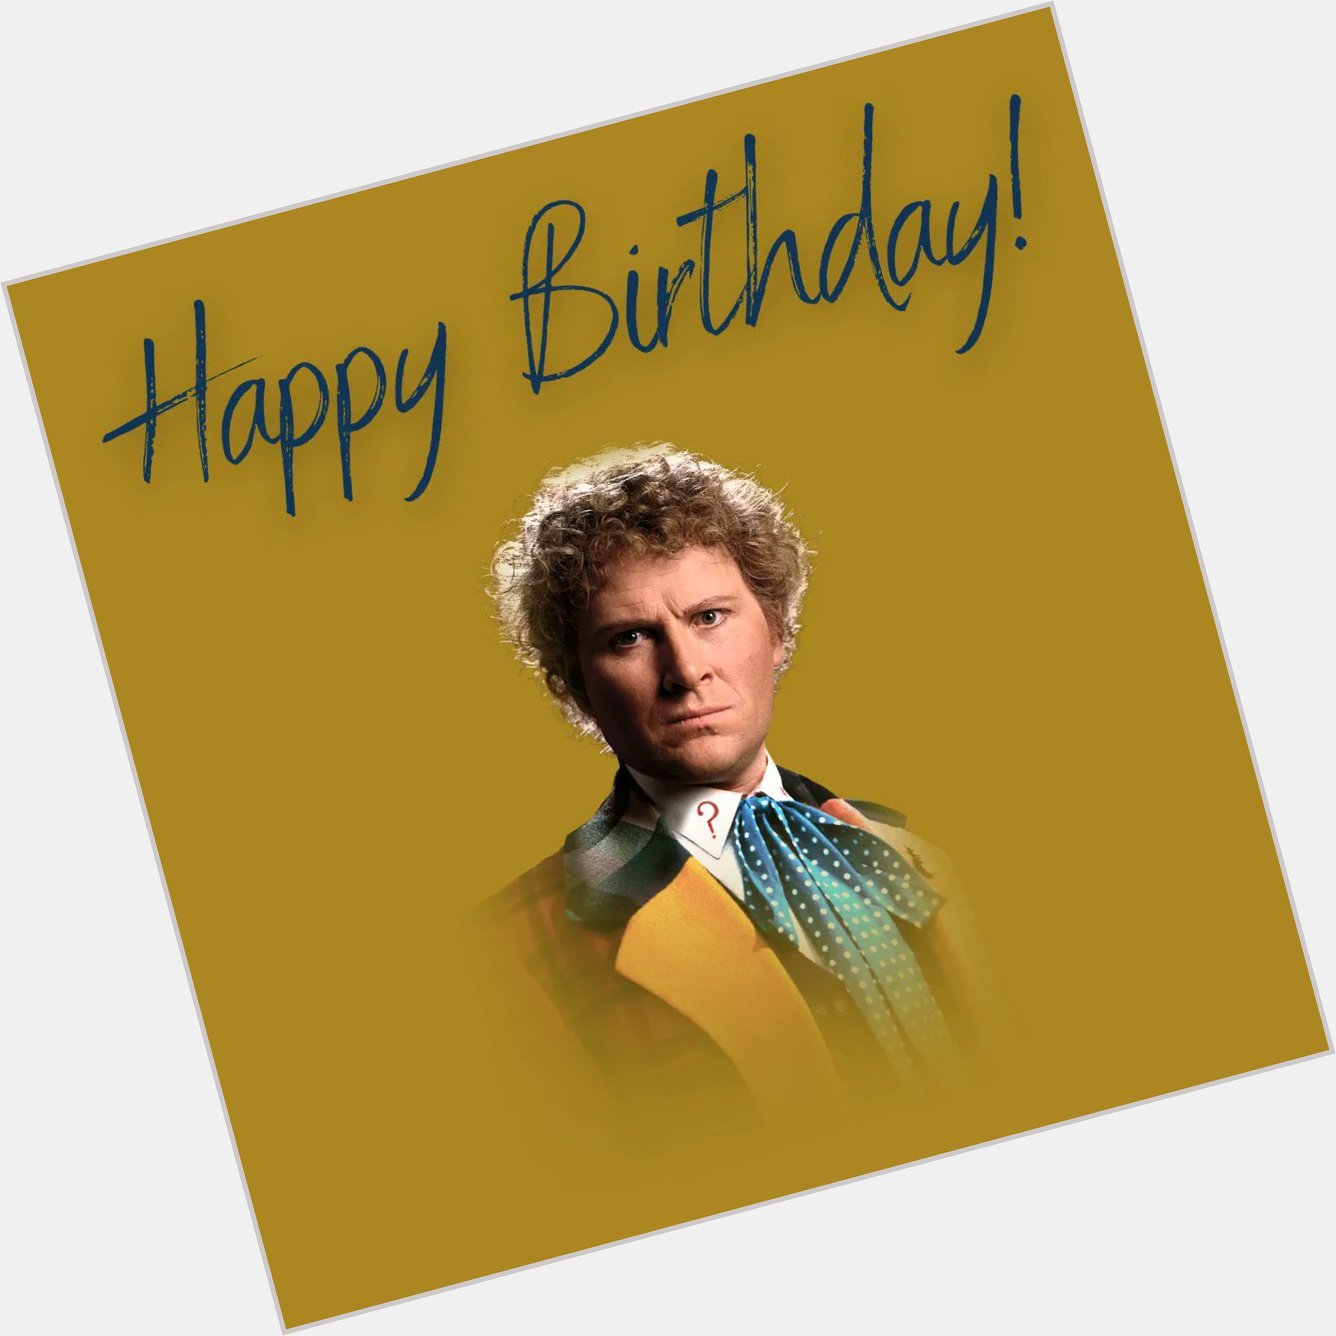 Happy birthday to the sixth Doctor, Colin Baker! 